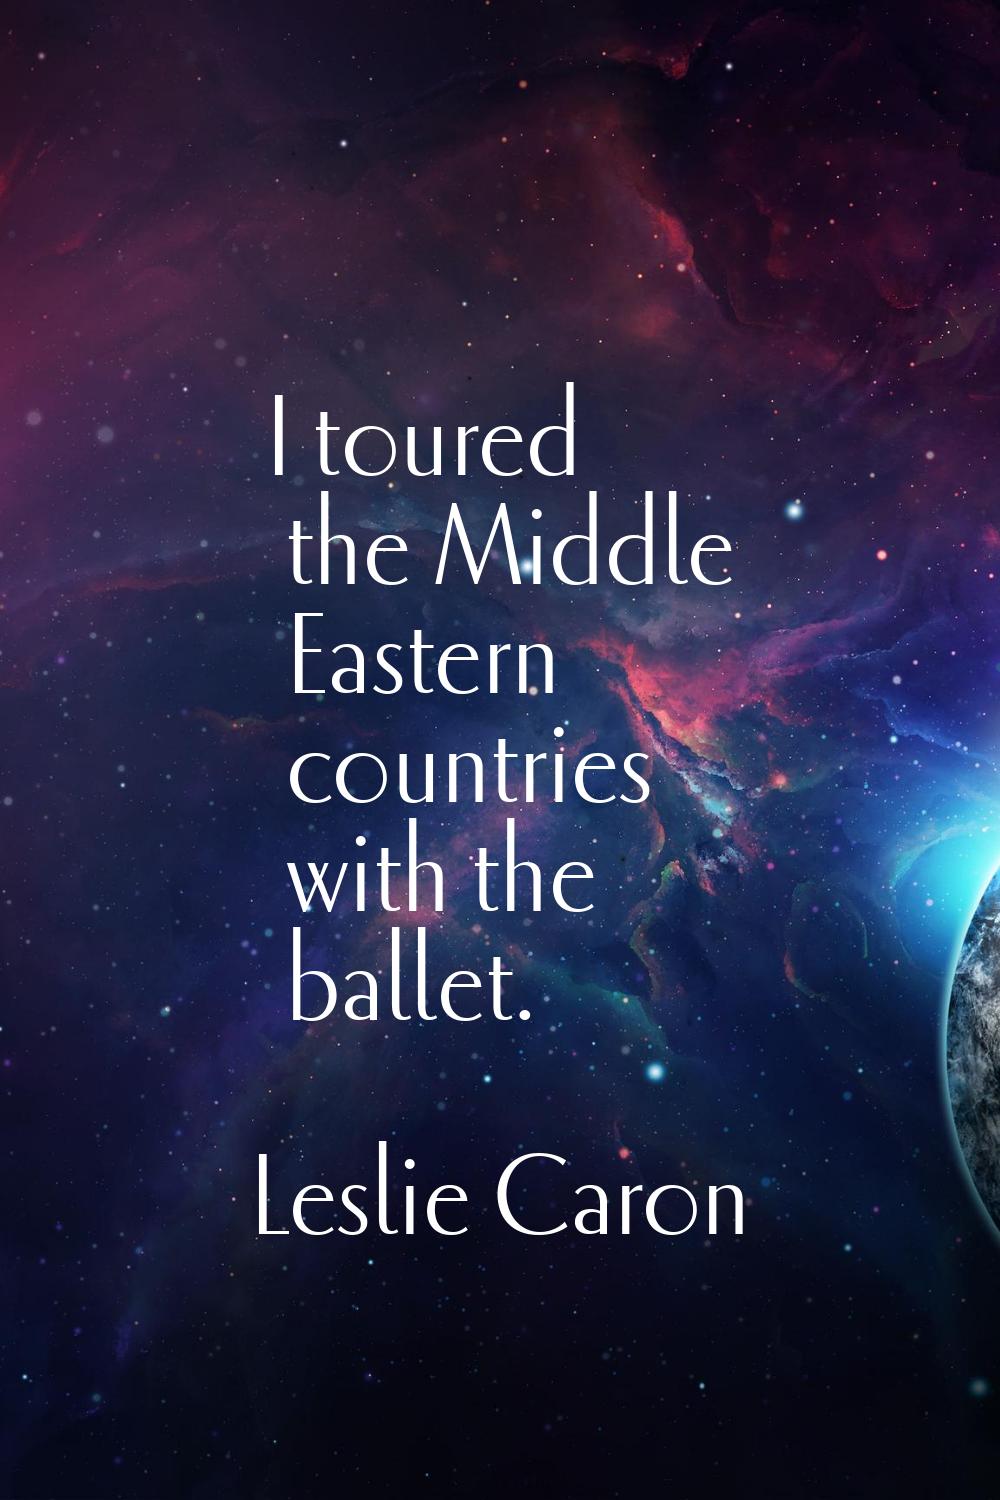 I toured the Middle Eastern countries with the ballet.